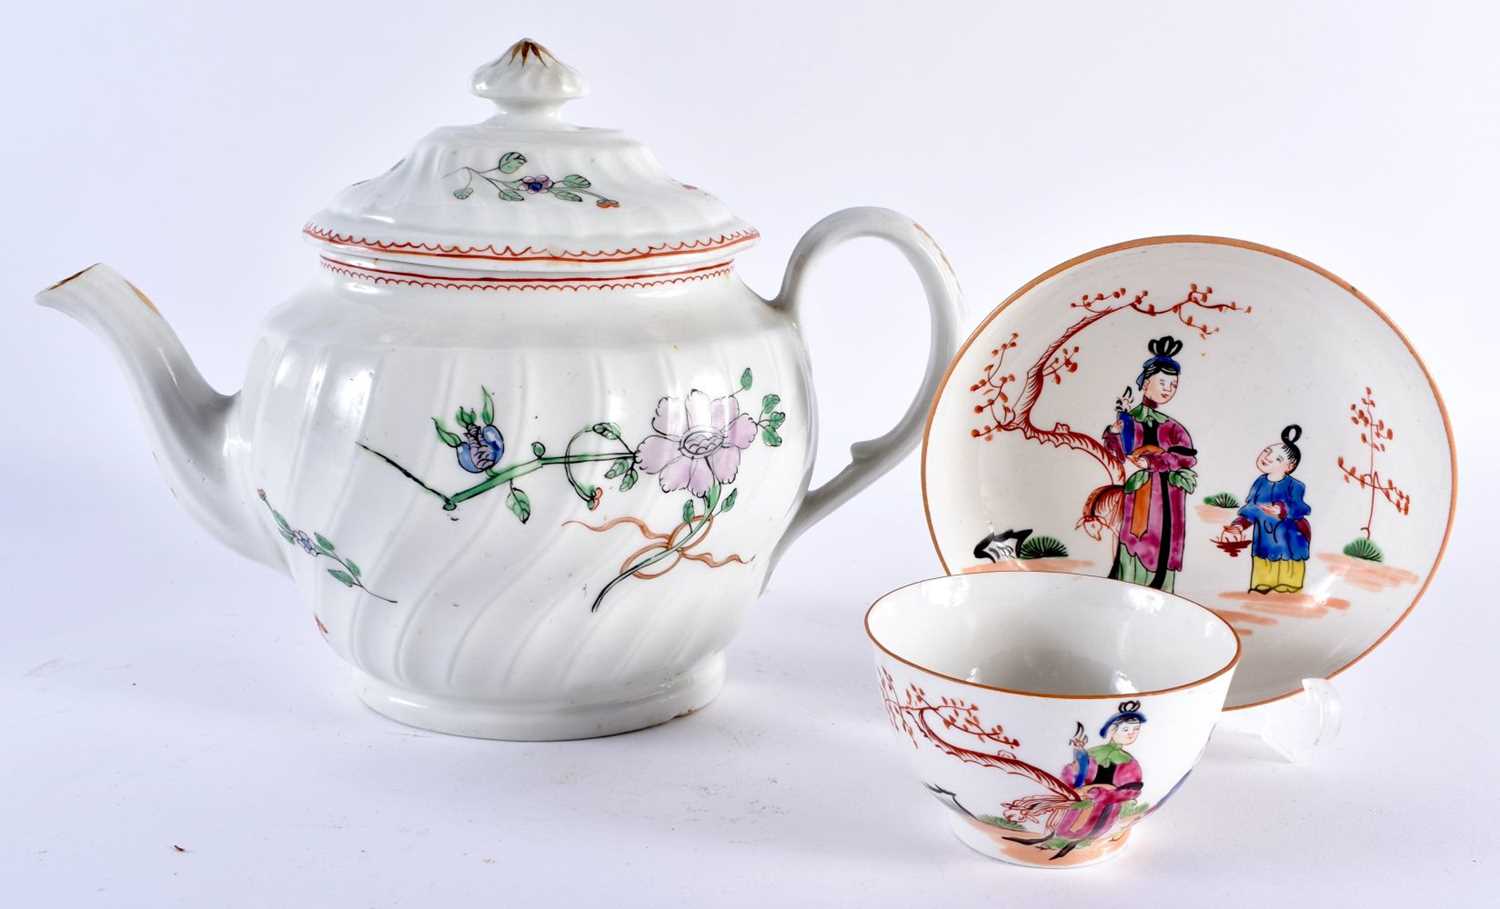 A LATE 18TH CENTURY CHAMBERLAINS WRYTHEN MOULDED TEAPOT AND COVER together with an 18th century